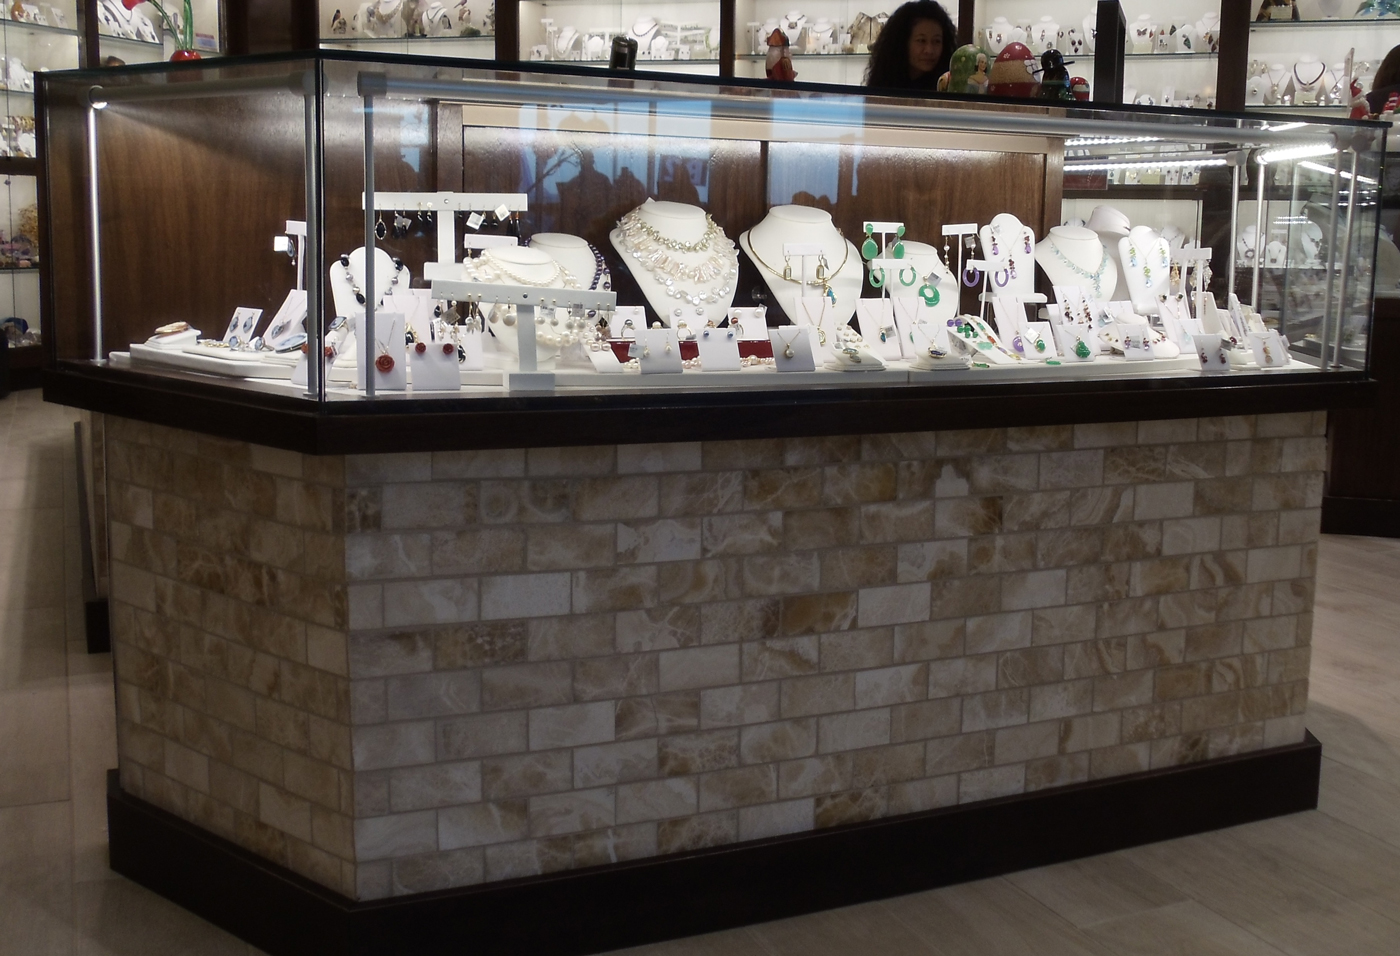 A jewelry display fixture.